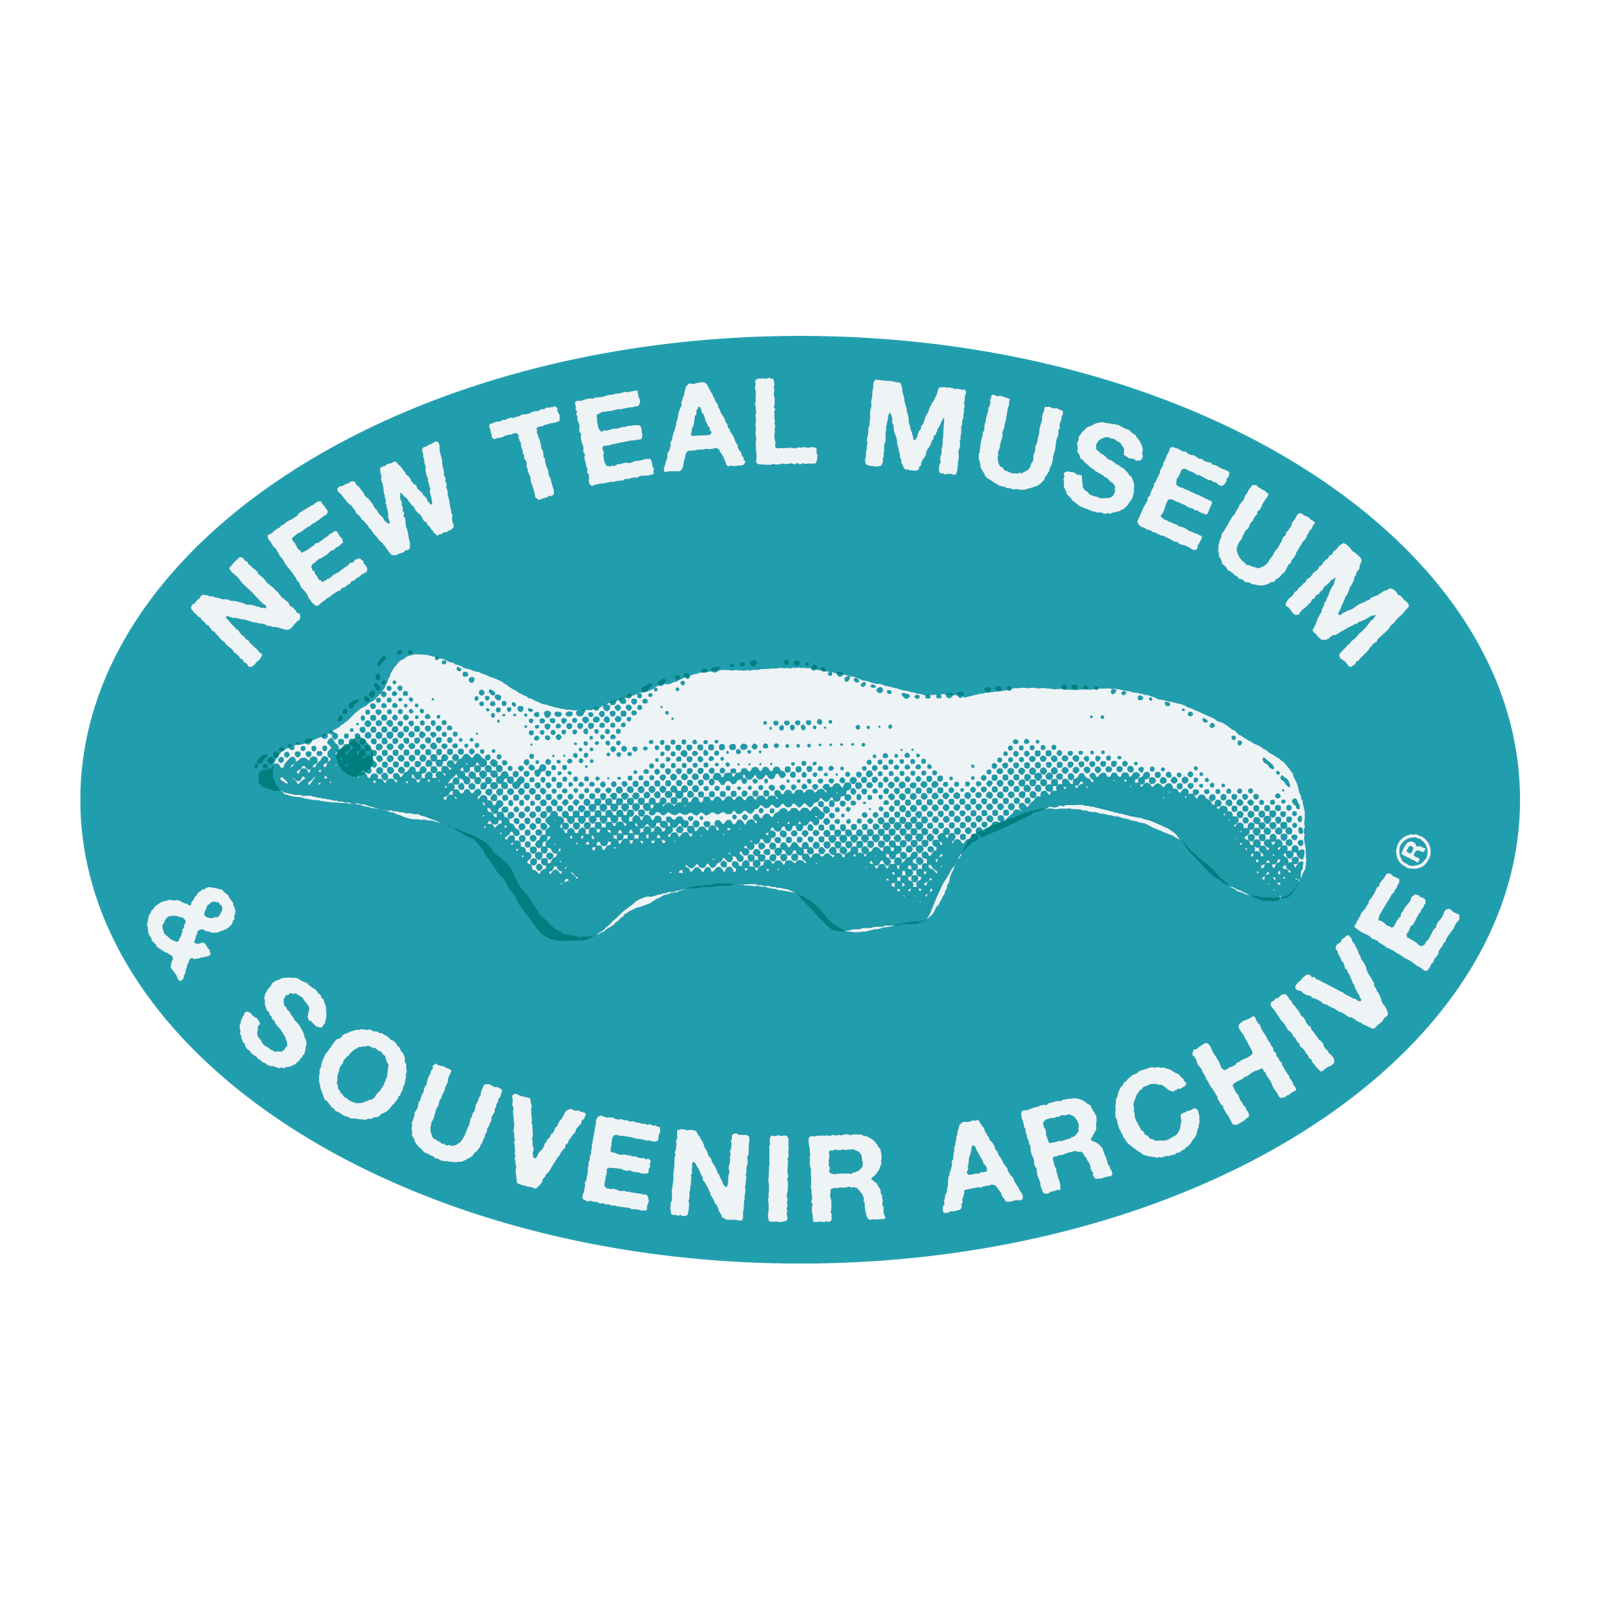 LITTLE WINGS NEW TEAL MUSEUM AND SOUVENIR ARCHIVE